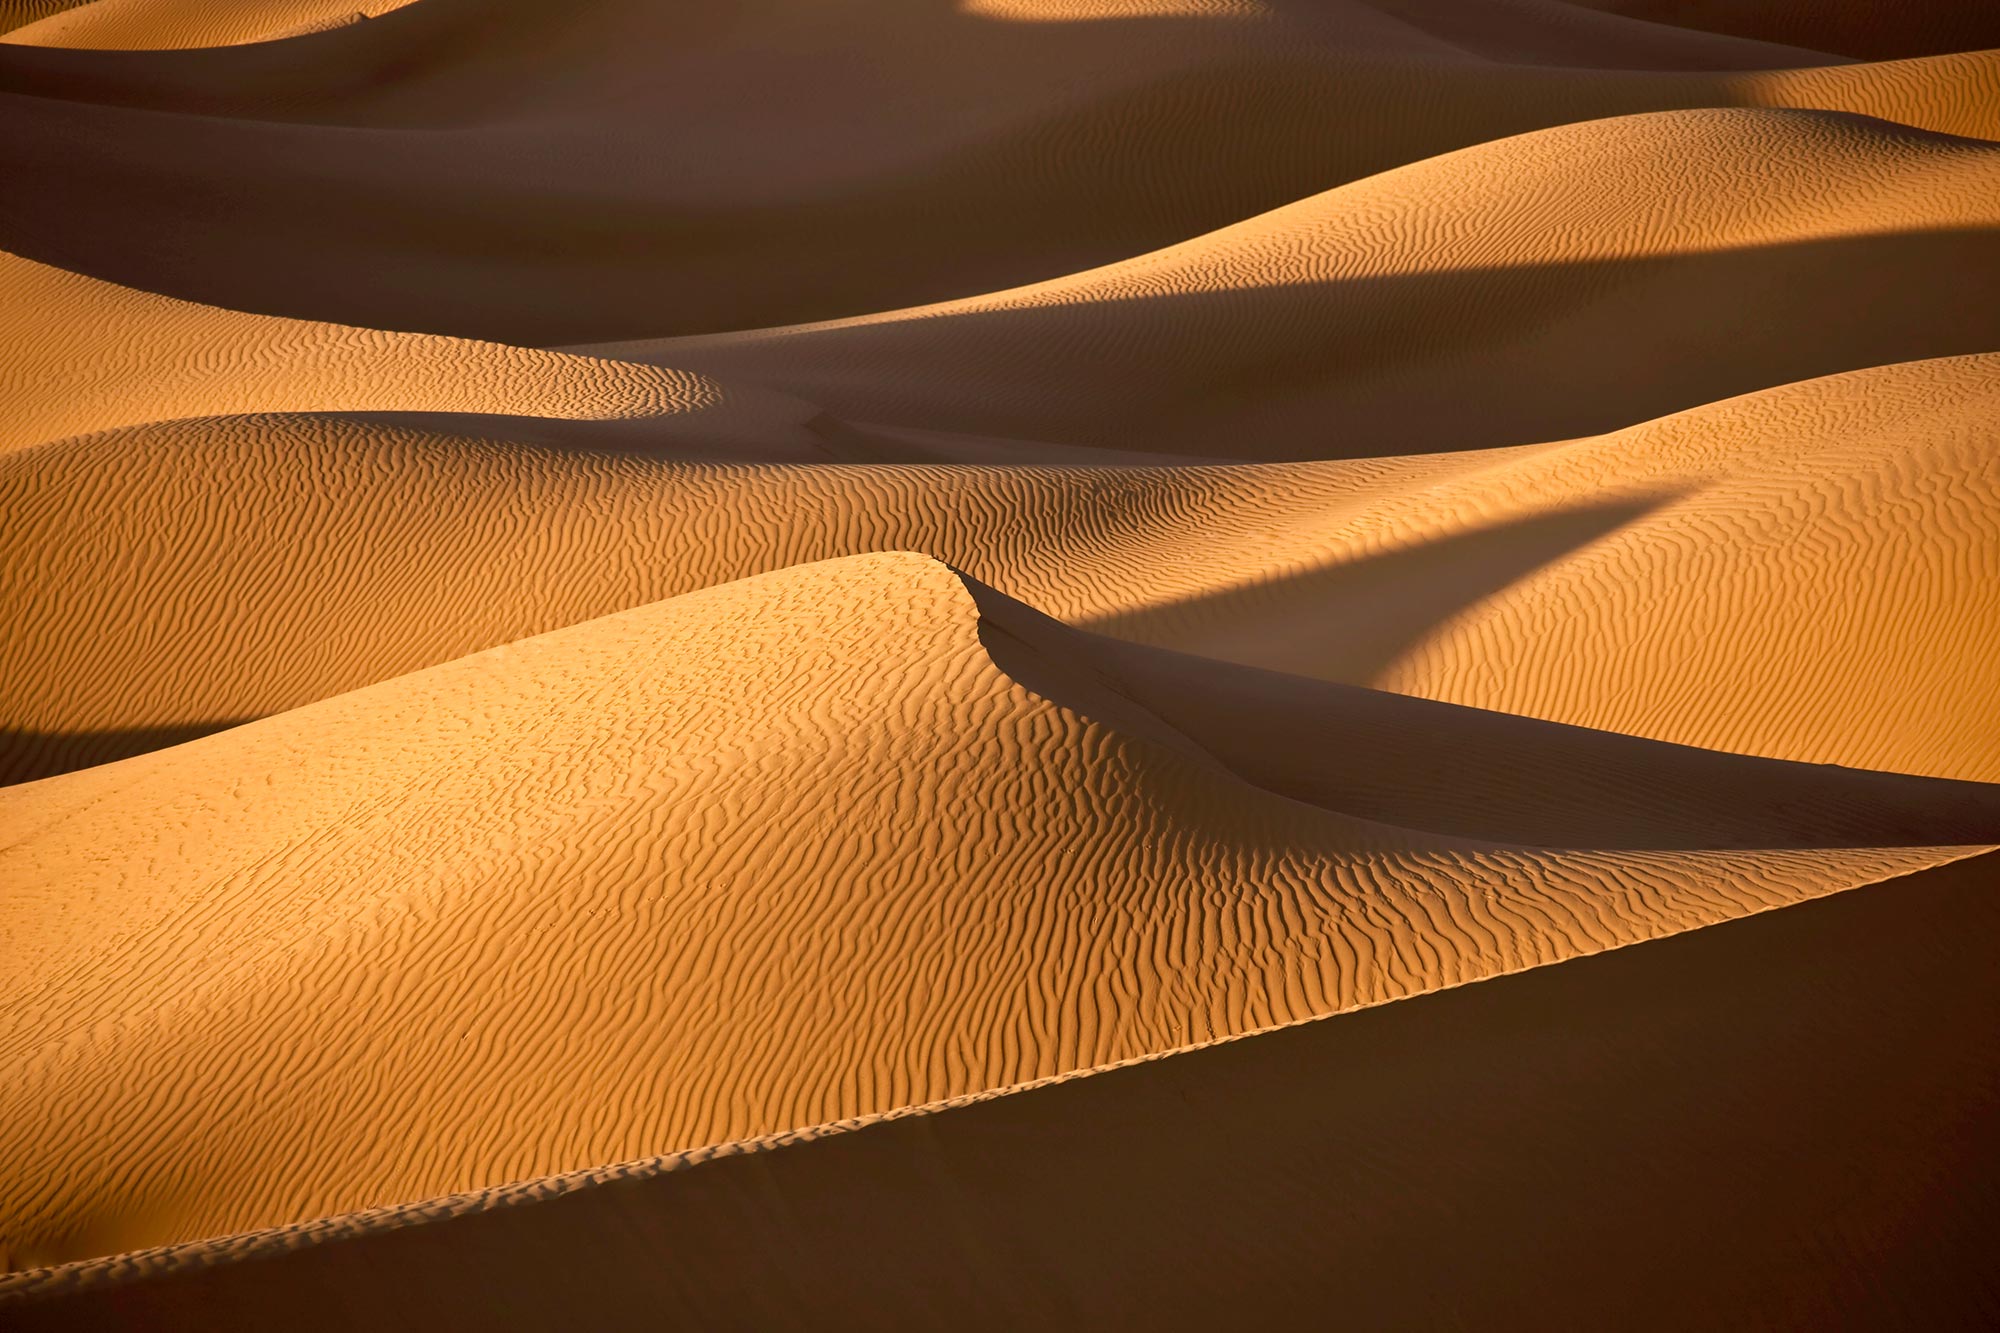 Physics Researchers Discover Sand Dunes Can 'Communicate' With